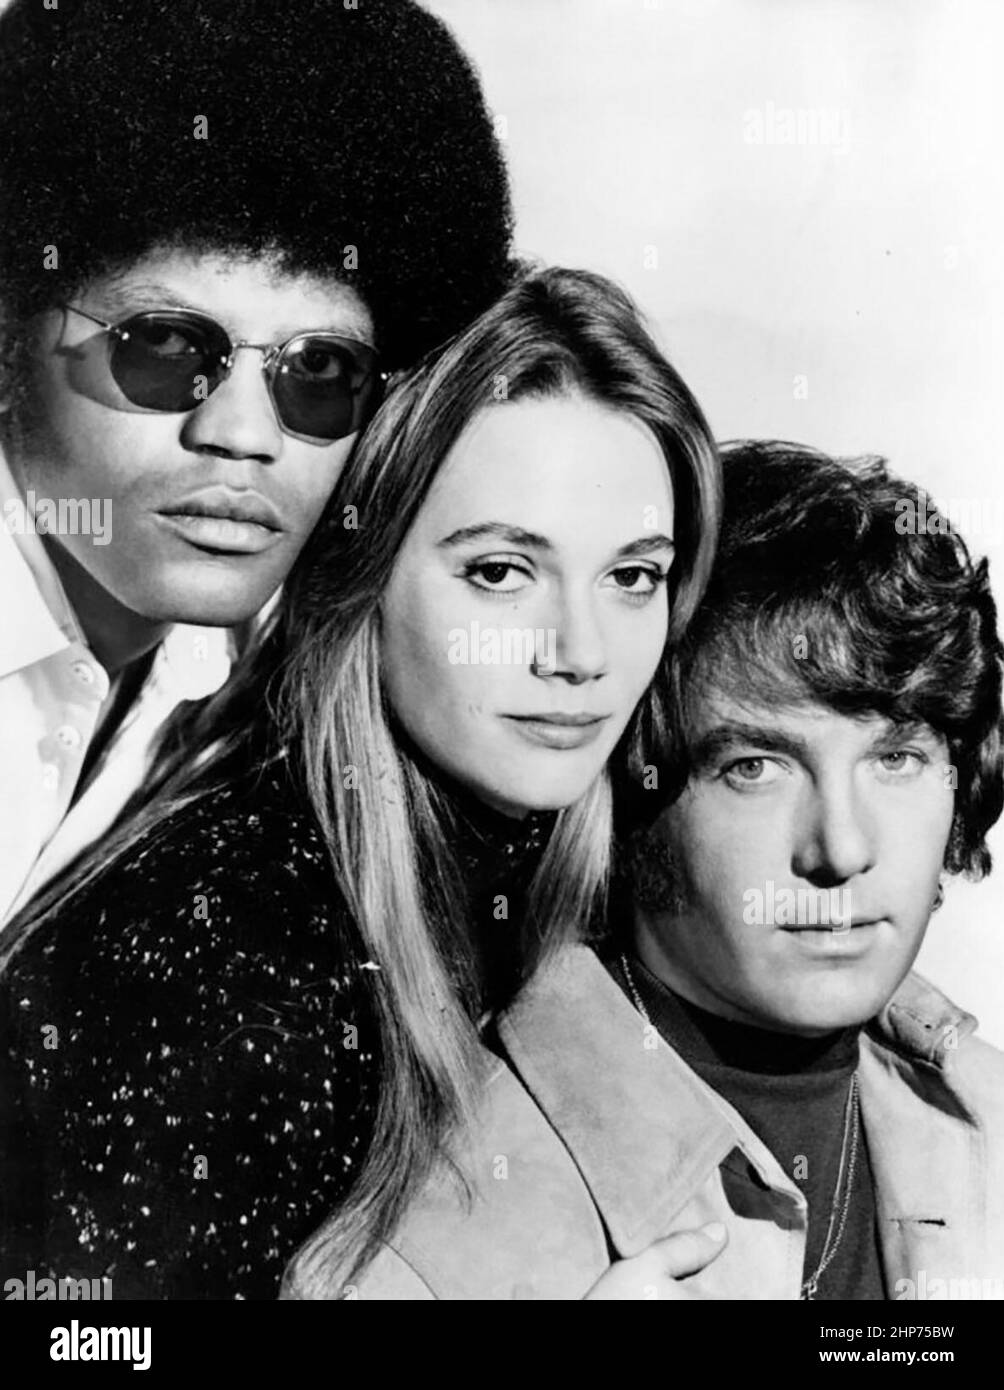 Publicity photo from the television program The Mod Squad.  The main cast is pictured, from left: Clarence Williams III, Peggy Lipton and Michael Cole Stock Photo